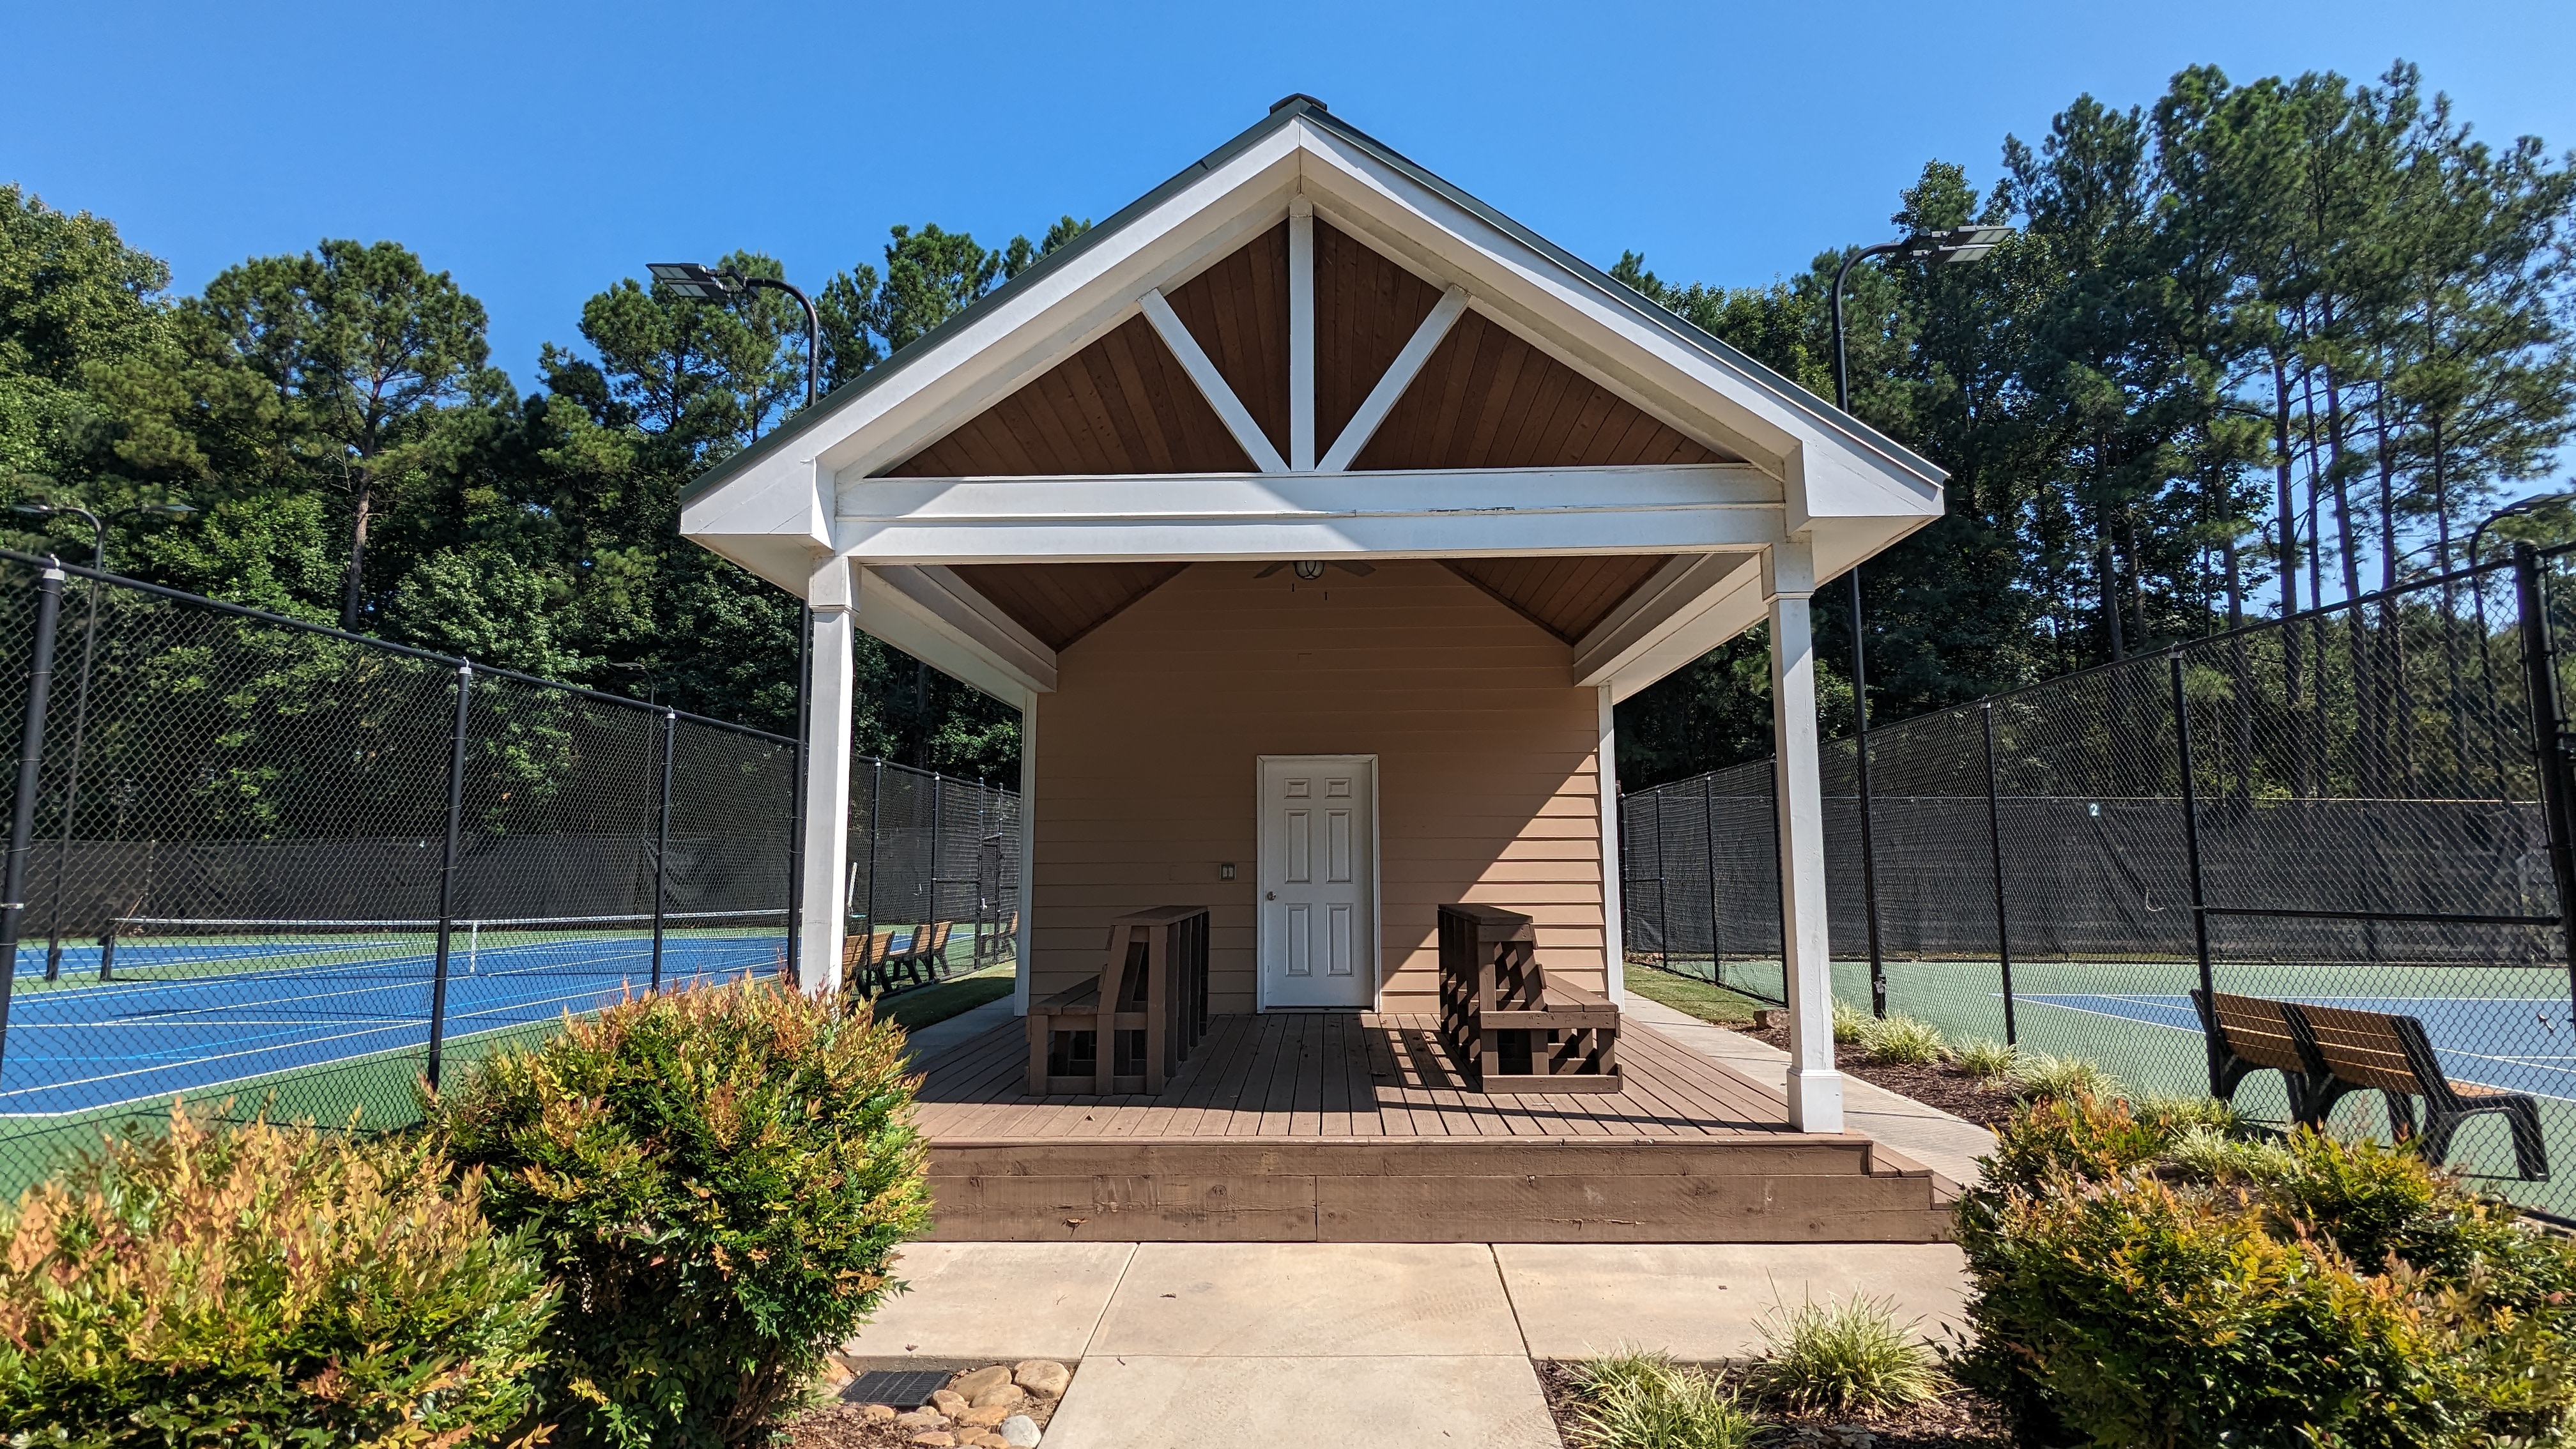 One of our tennis pavilions.